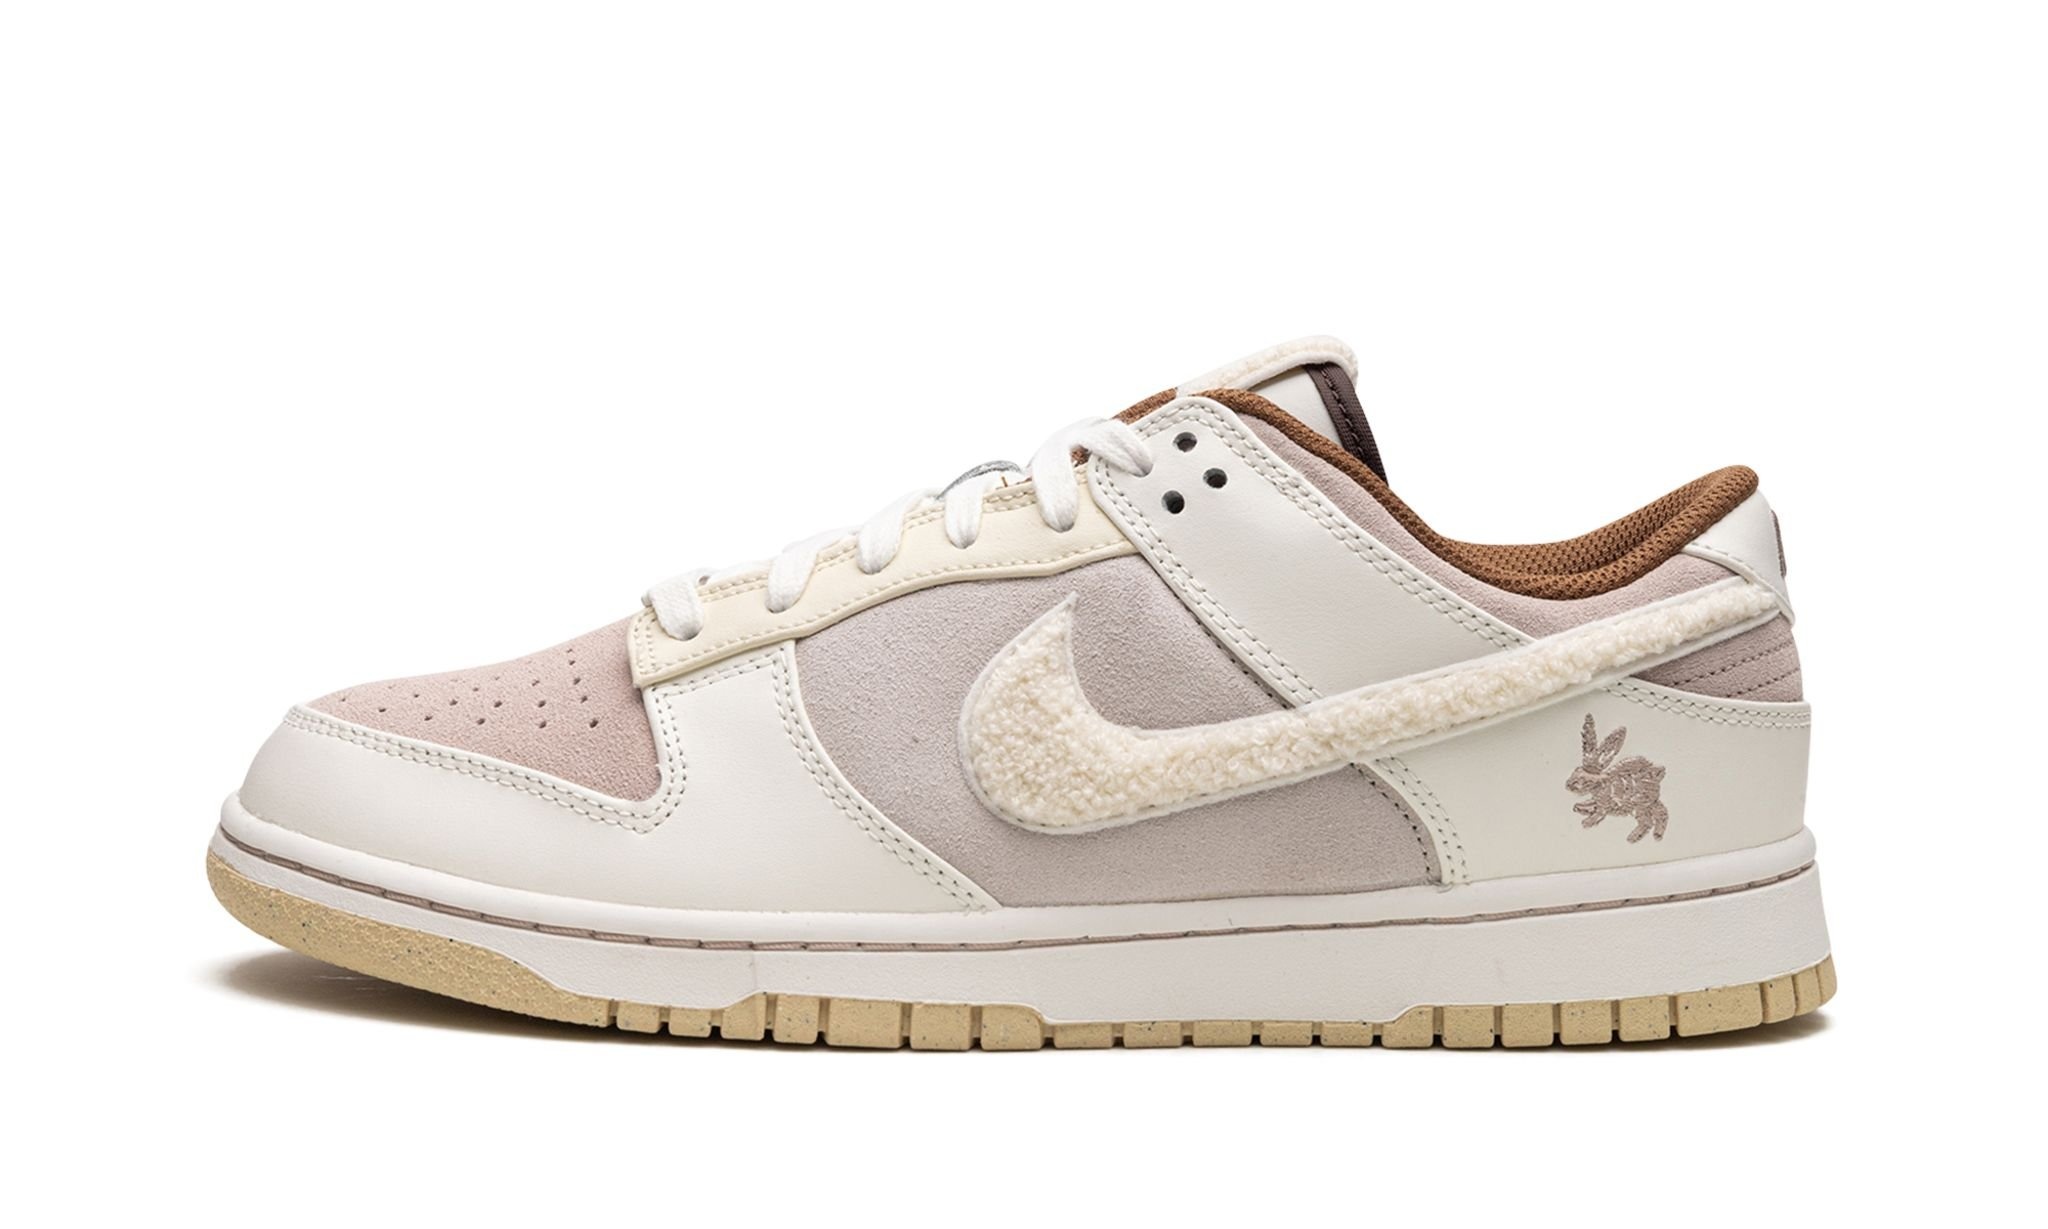 Dunk Low Retro PRM "Year of the Rabbit" - 1